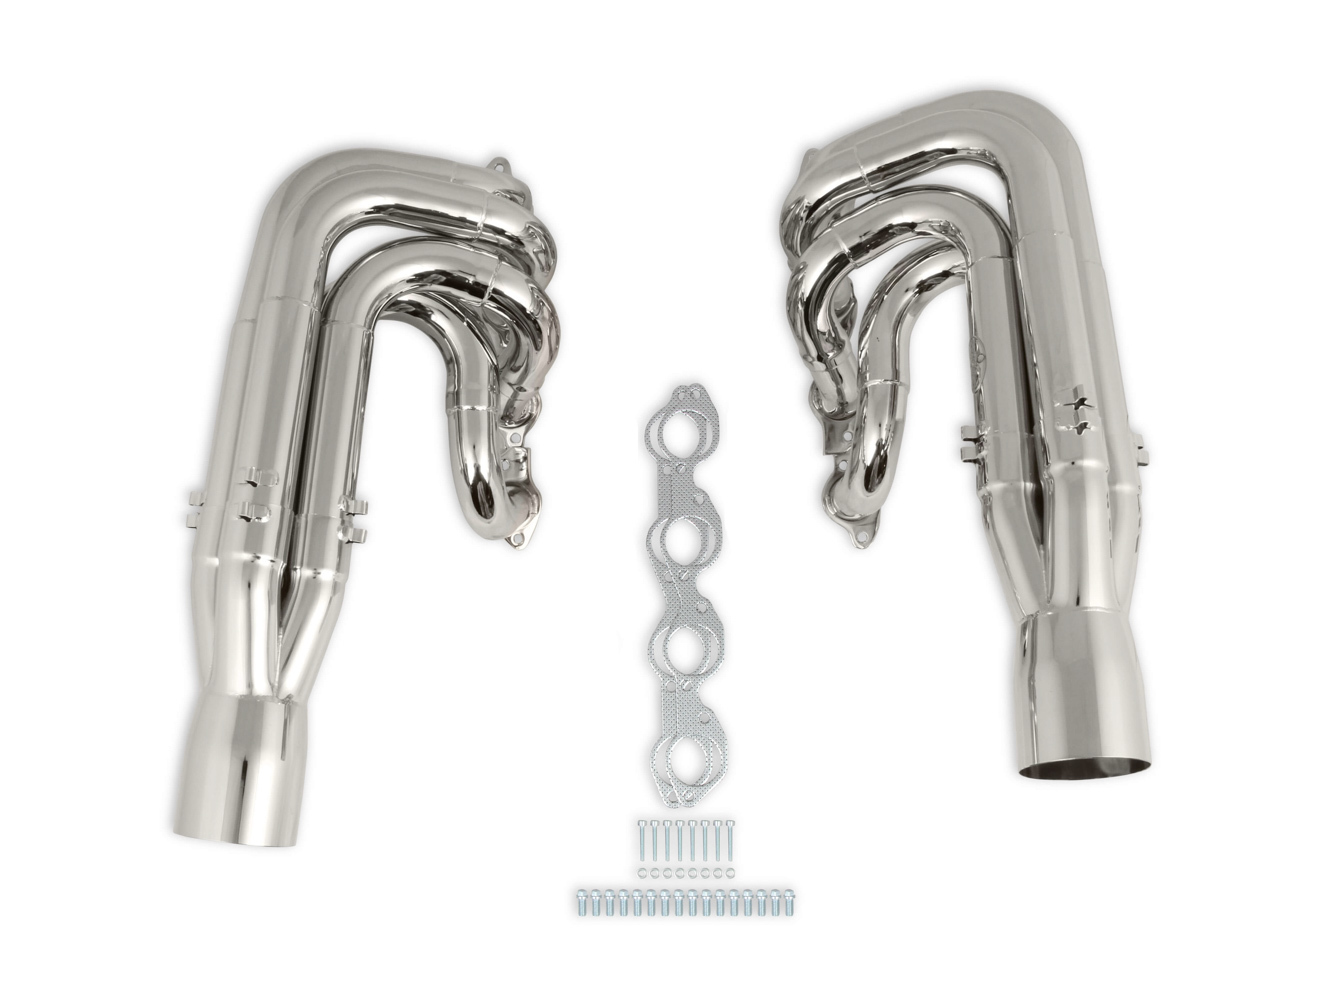 Hooker Headers 2502-6HKR - Headers, Racingheart, 3-Step, 2-1/8 to 2-1/4 to 2-3/8 in Primary, 4-1/2 in Collector, Stainless, Chrome, Big Block Chevy, Kit